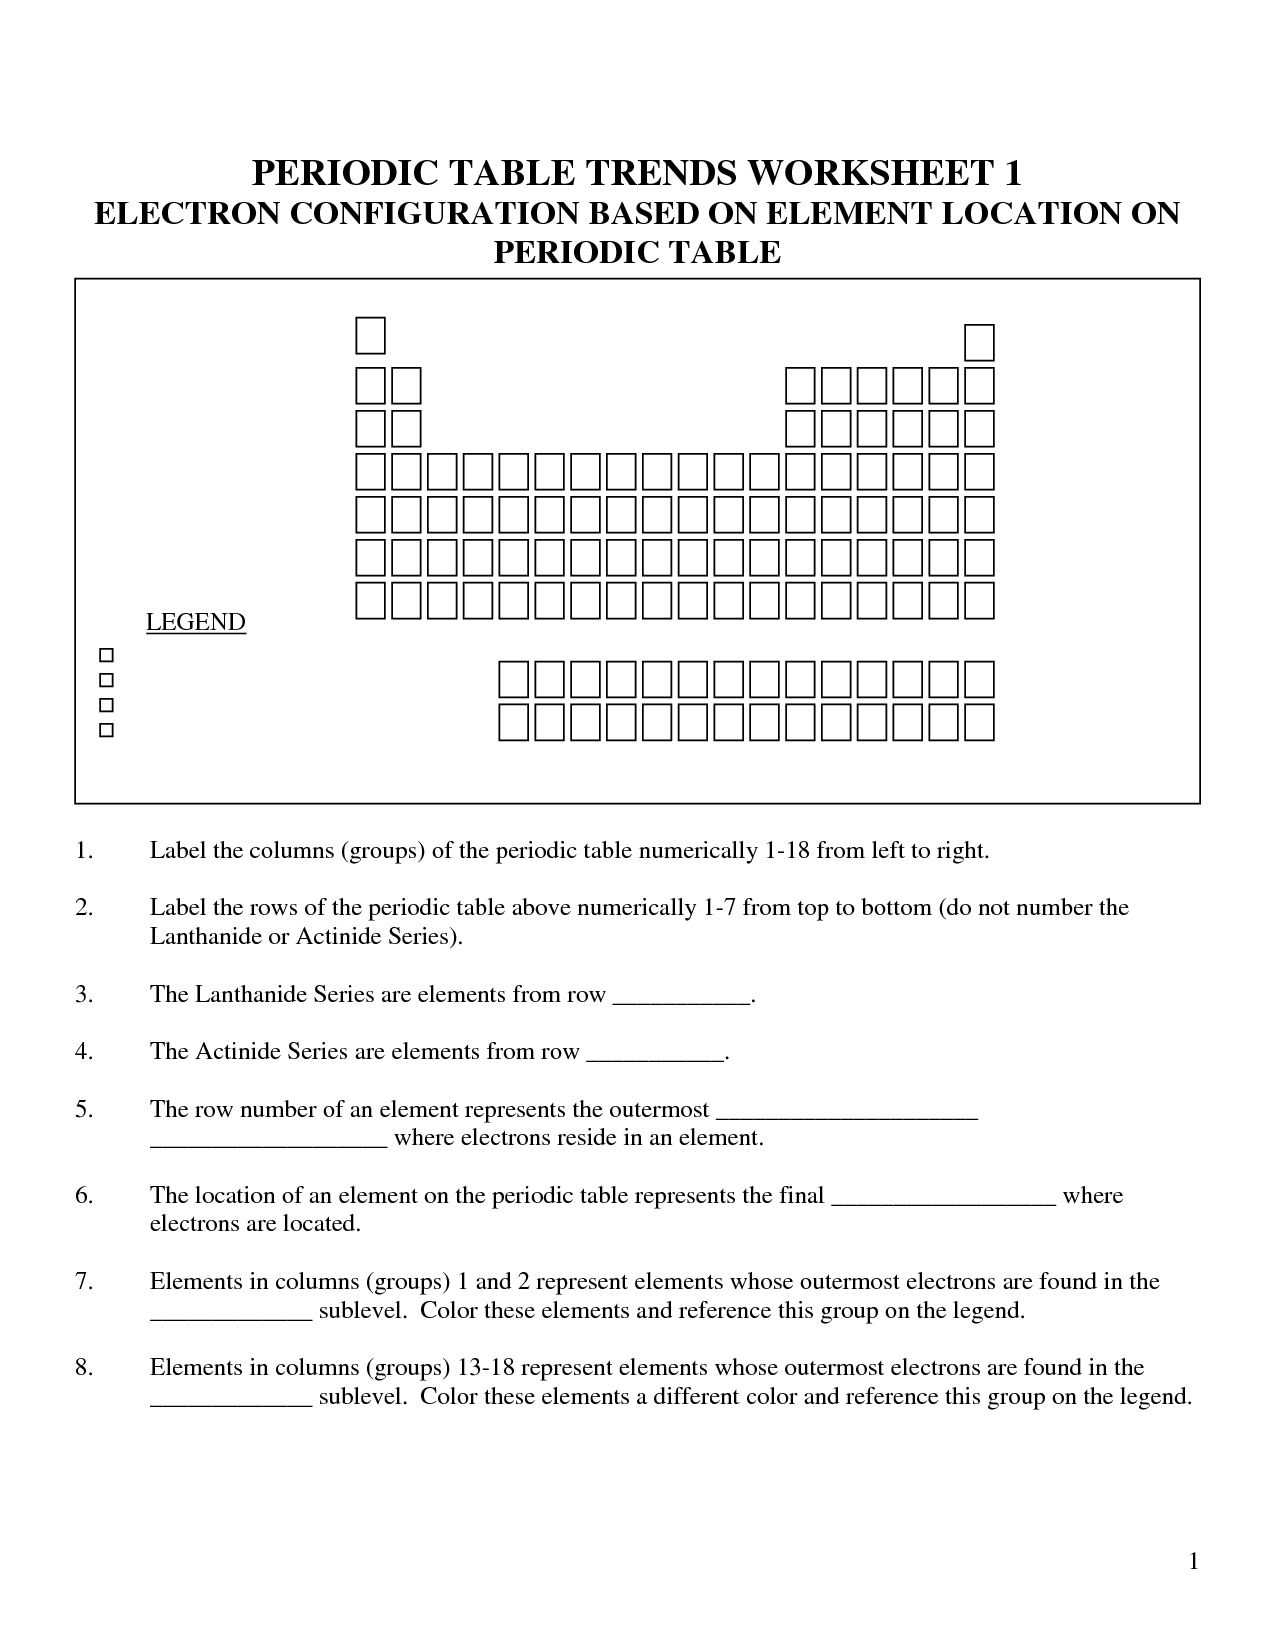 5 Best Images of Branches Of Science Worksheet - Physical Science ...